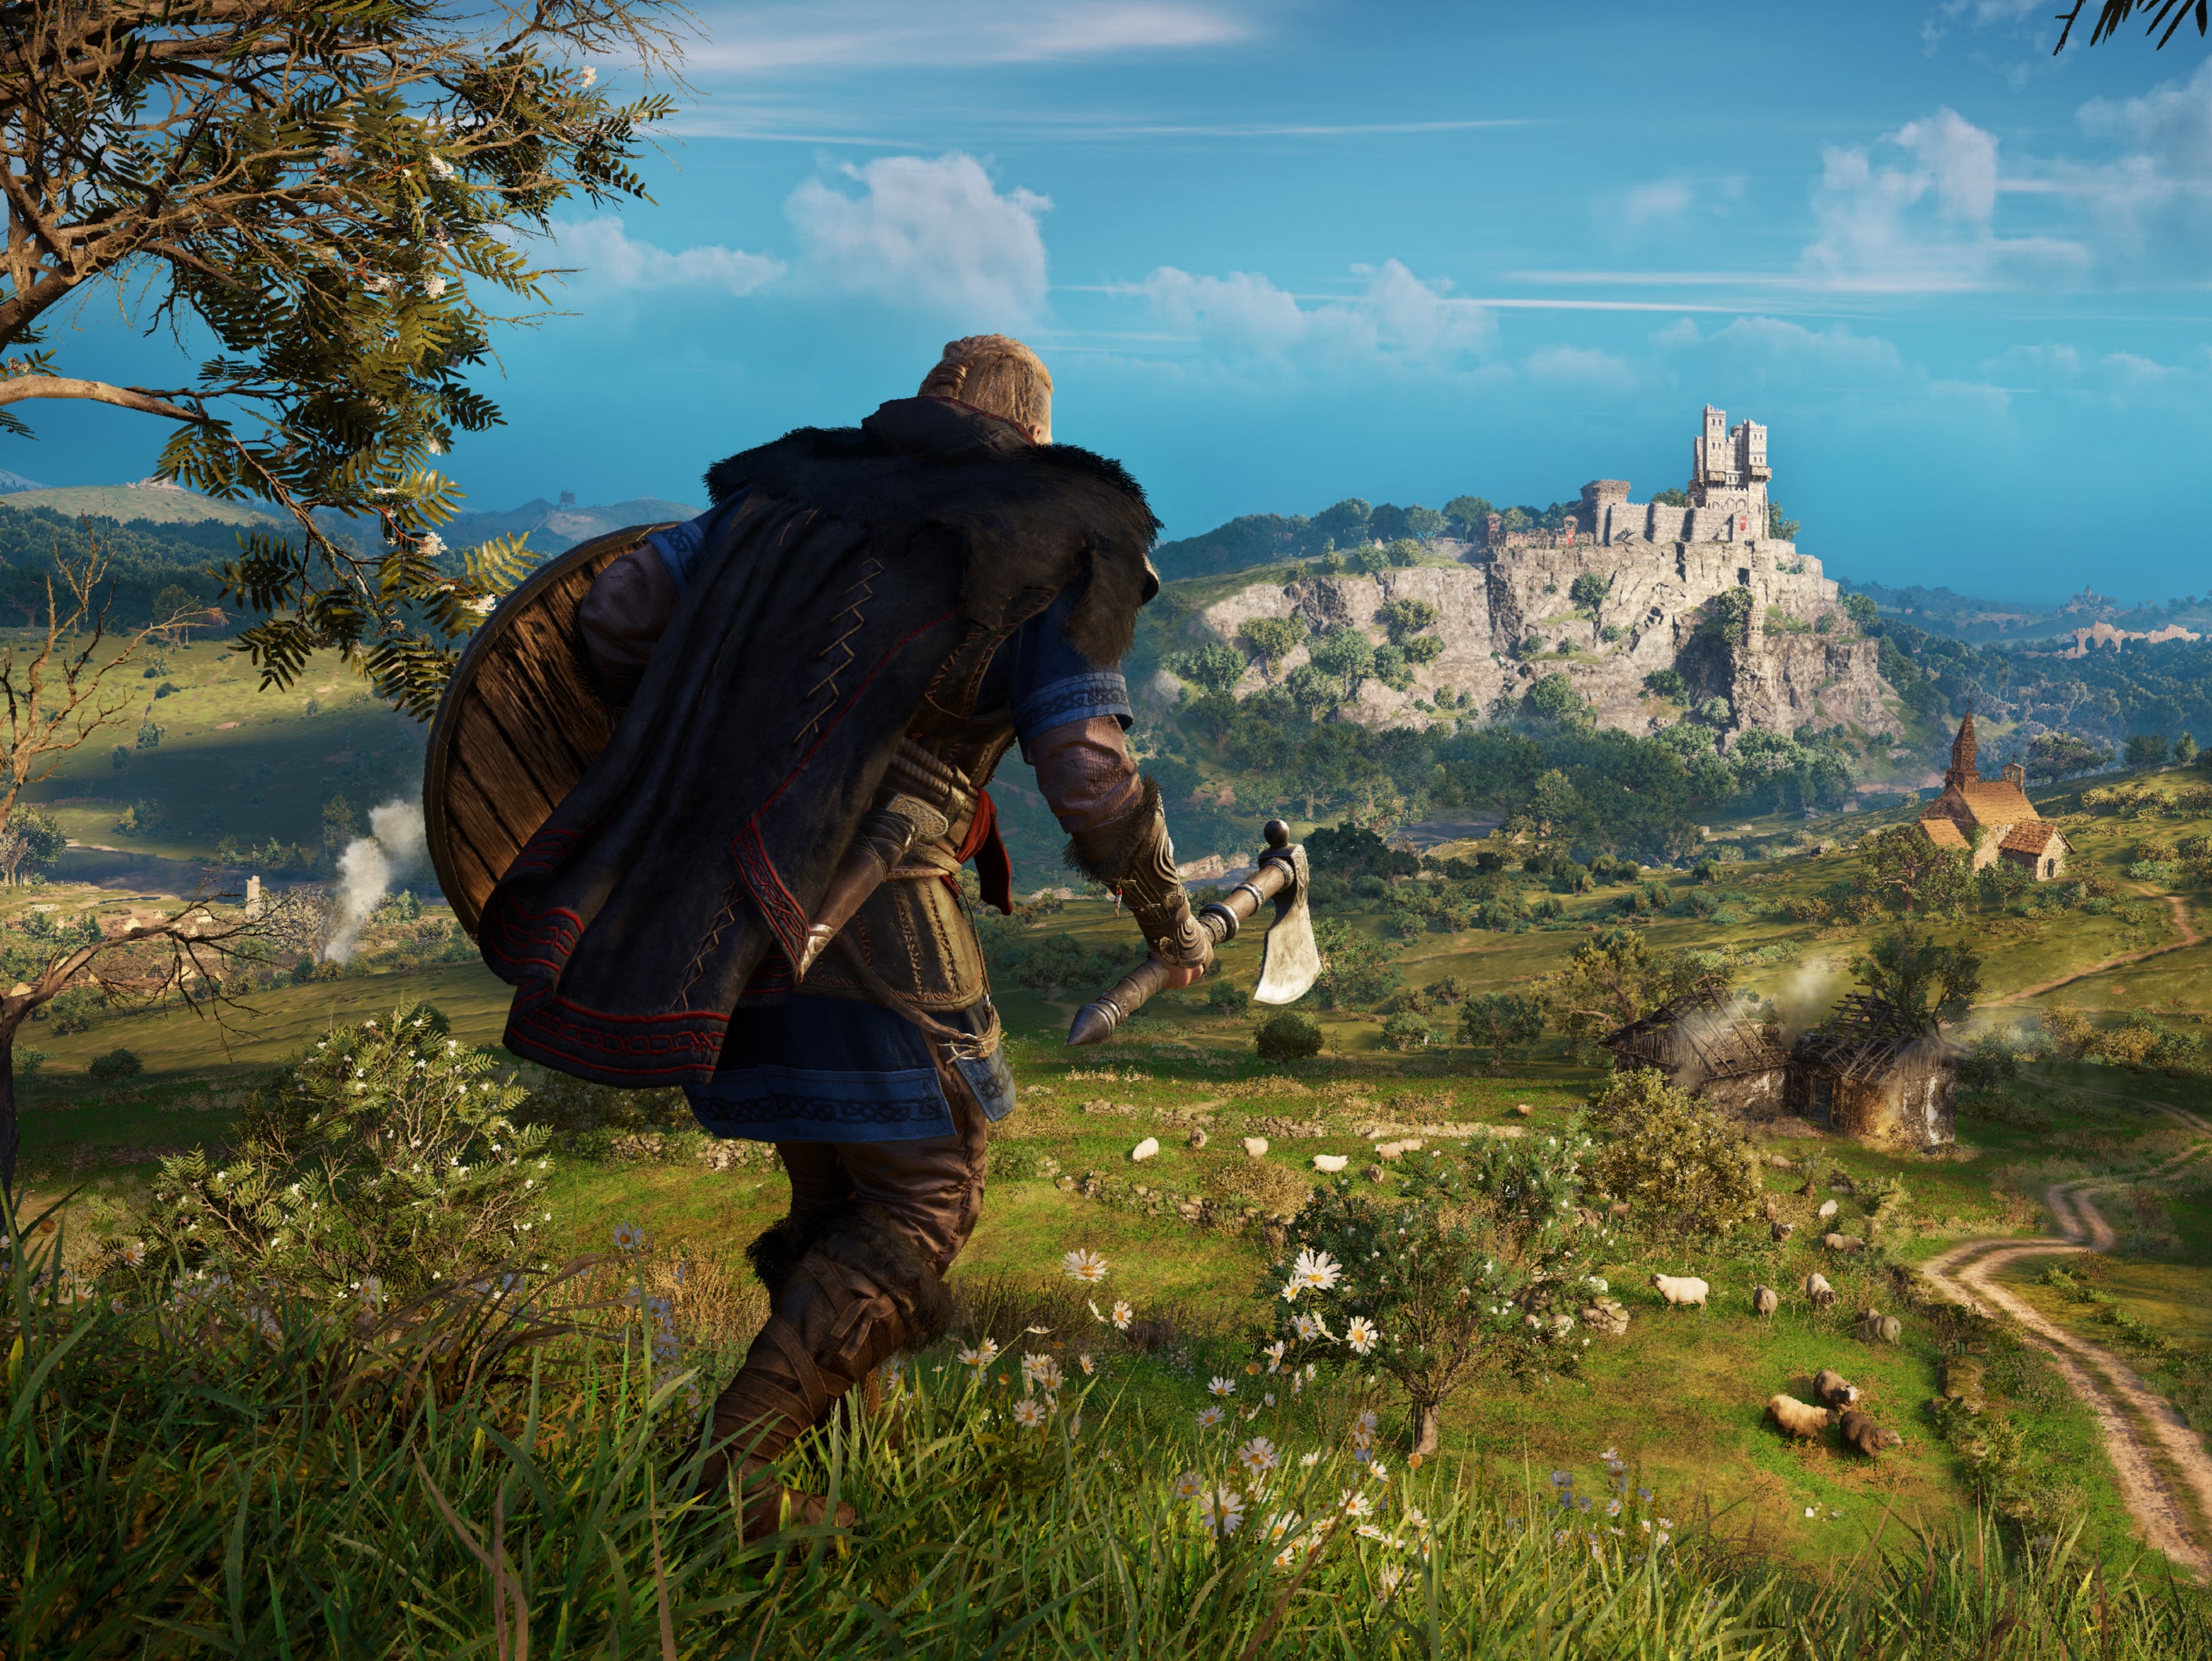 Assassin’s Creed Valhalla is one of several games coming to next-gen consoles in time for launch